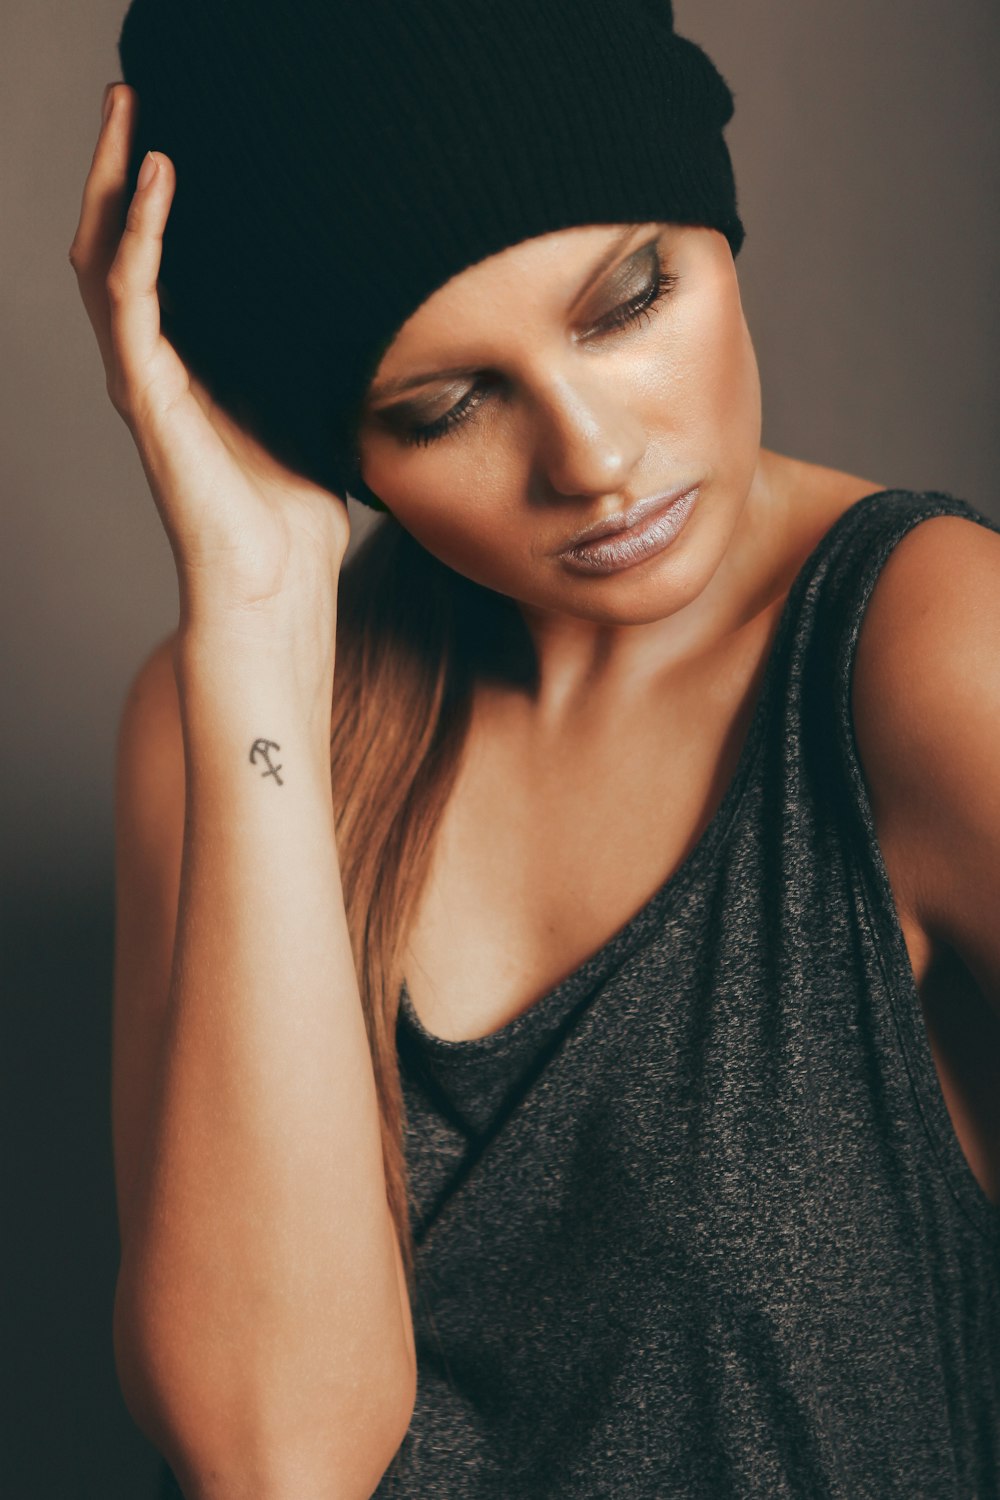 woman wearing black tank top and black knit cap holding head